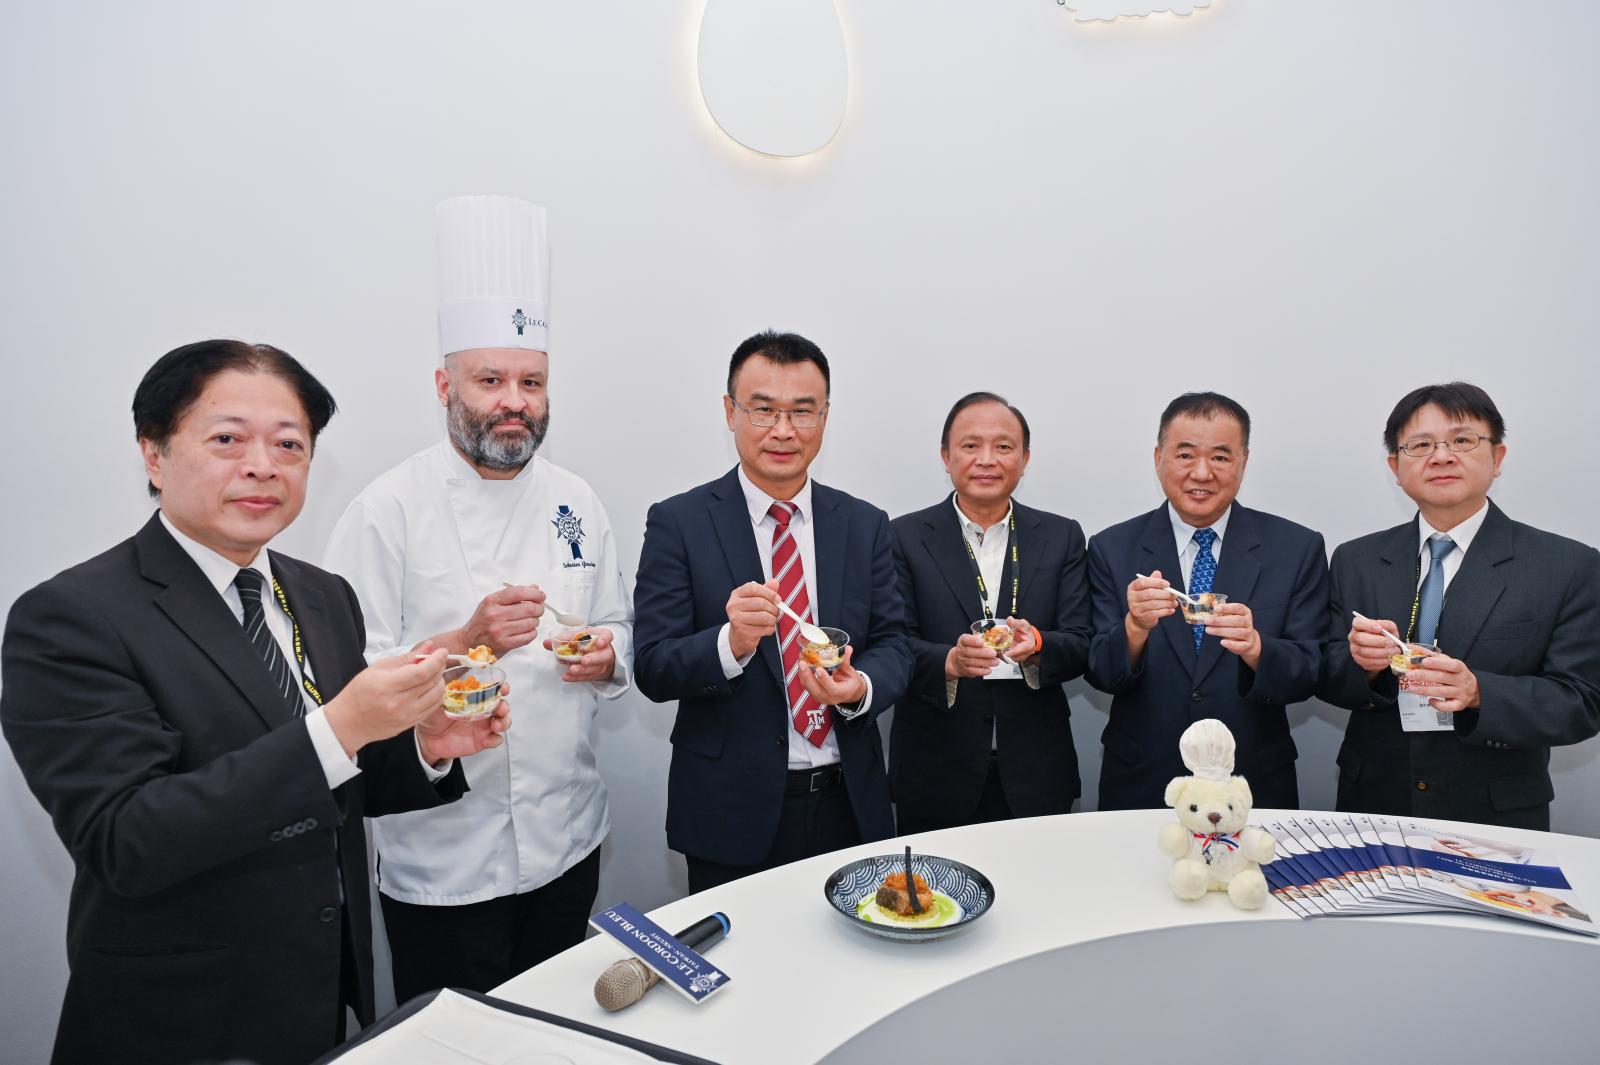 Figure 4：A group photo including Minster Chen and chefs from Le Cordon Bleu Kaohsiung.